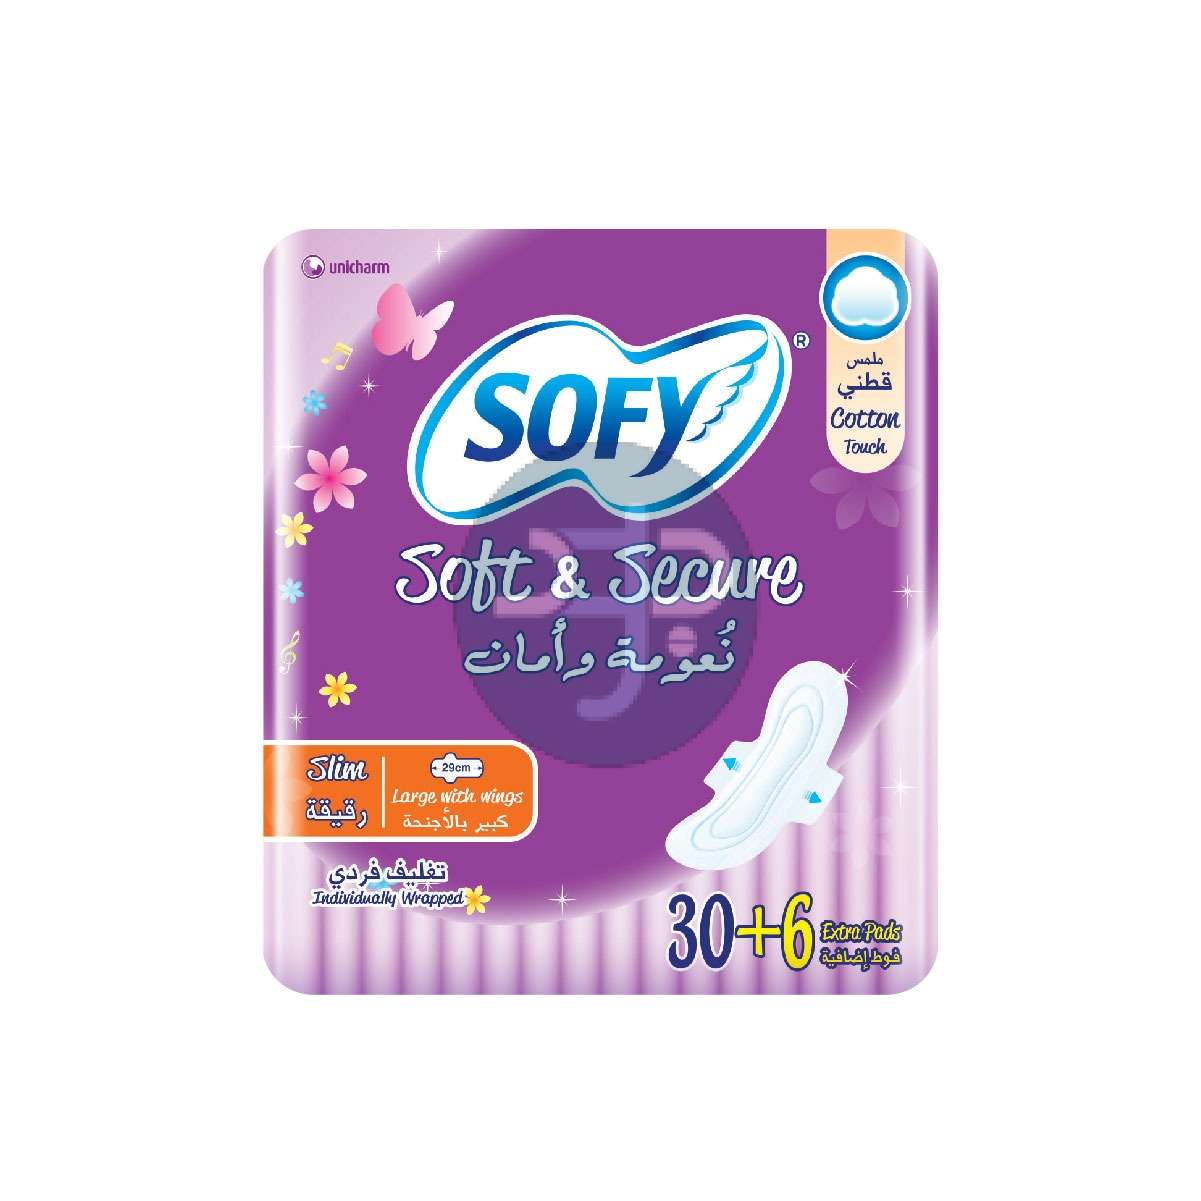 Product-SOFY Soft & Secure Sanitary Pads with Wings, Slim, Large 29 cm, Pack of 36 Pads (30 + 6 Free)